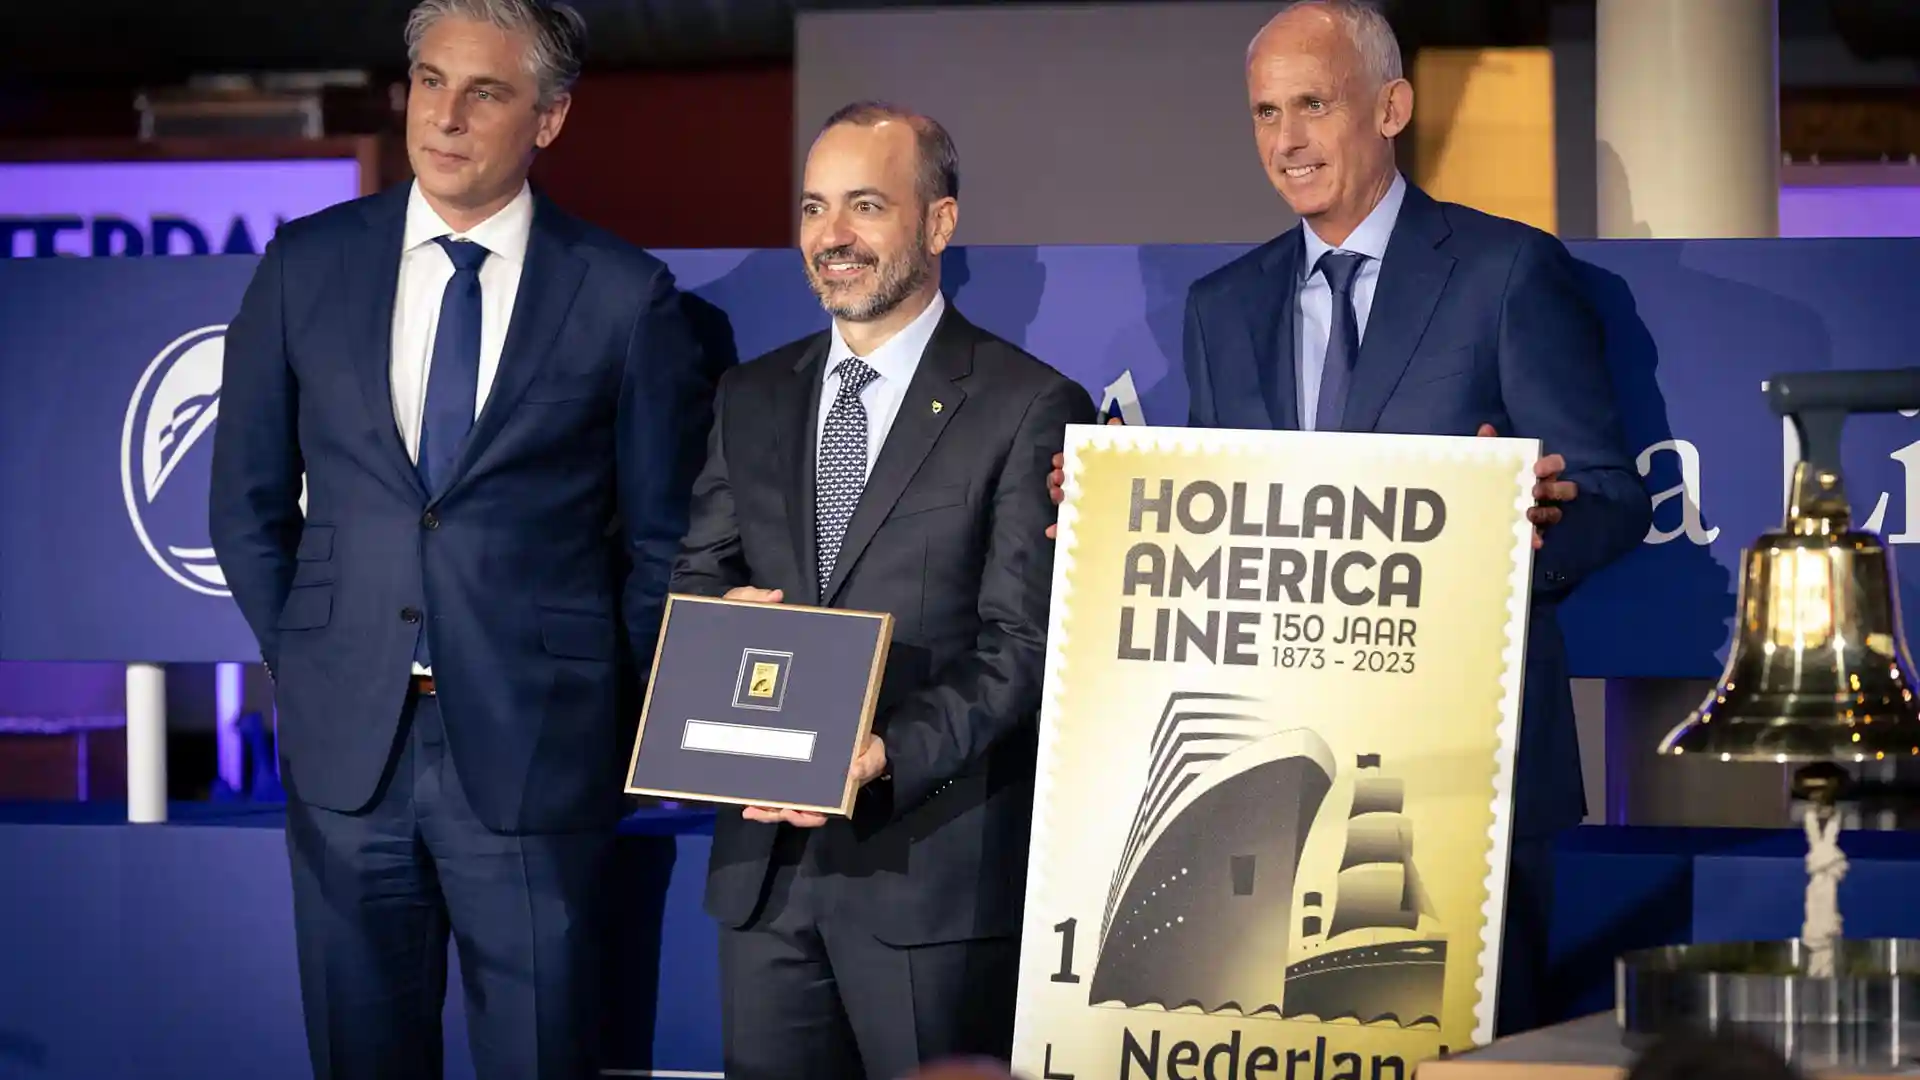 People smiling and holding framed certificate at ceremony celebrating Holland America Line's 150th anniversary.